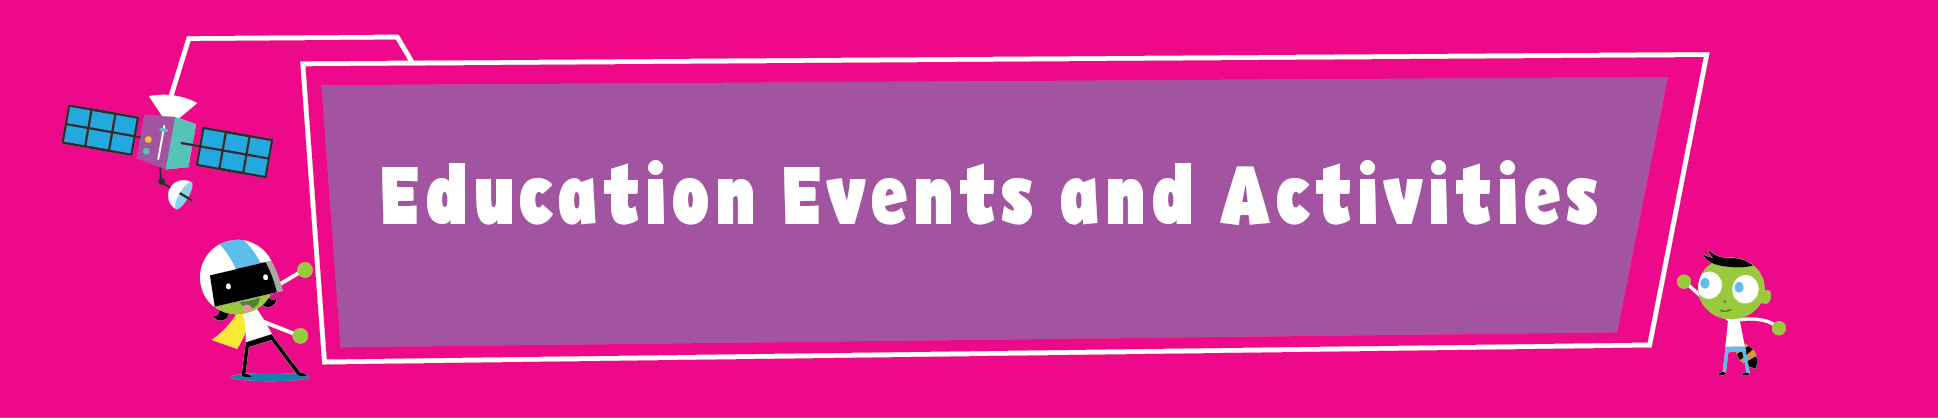 Education Events header